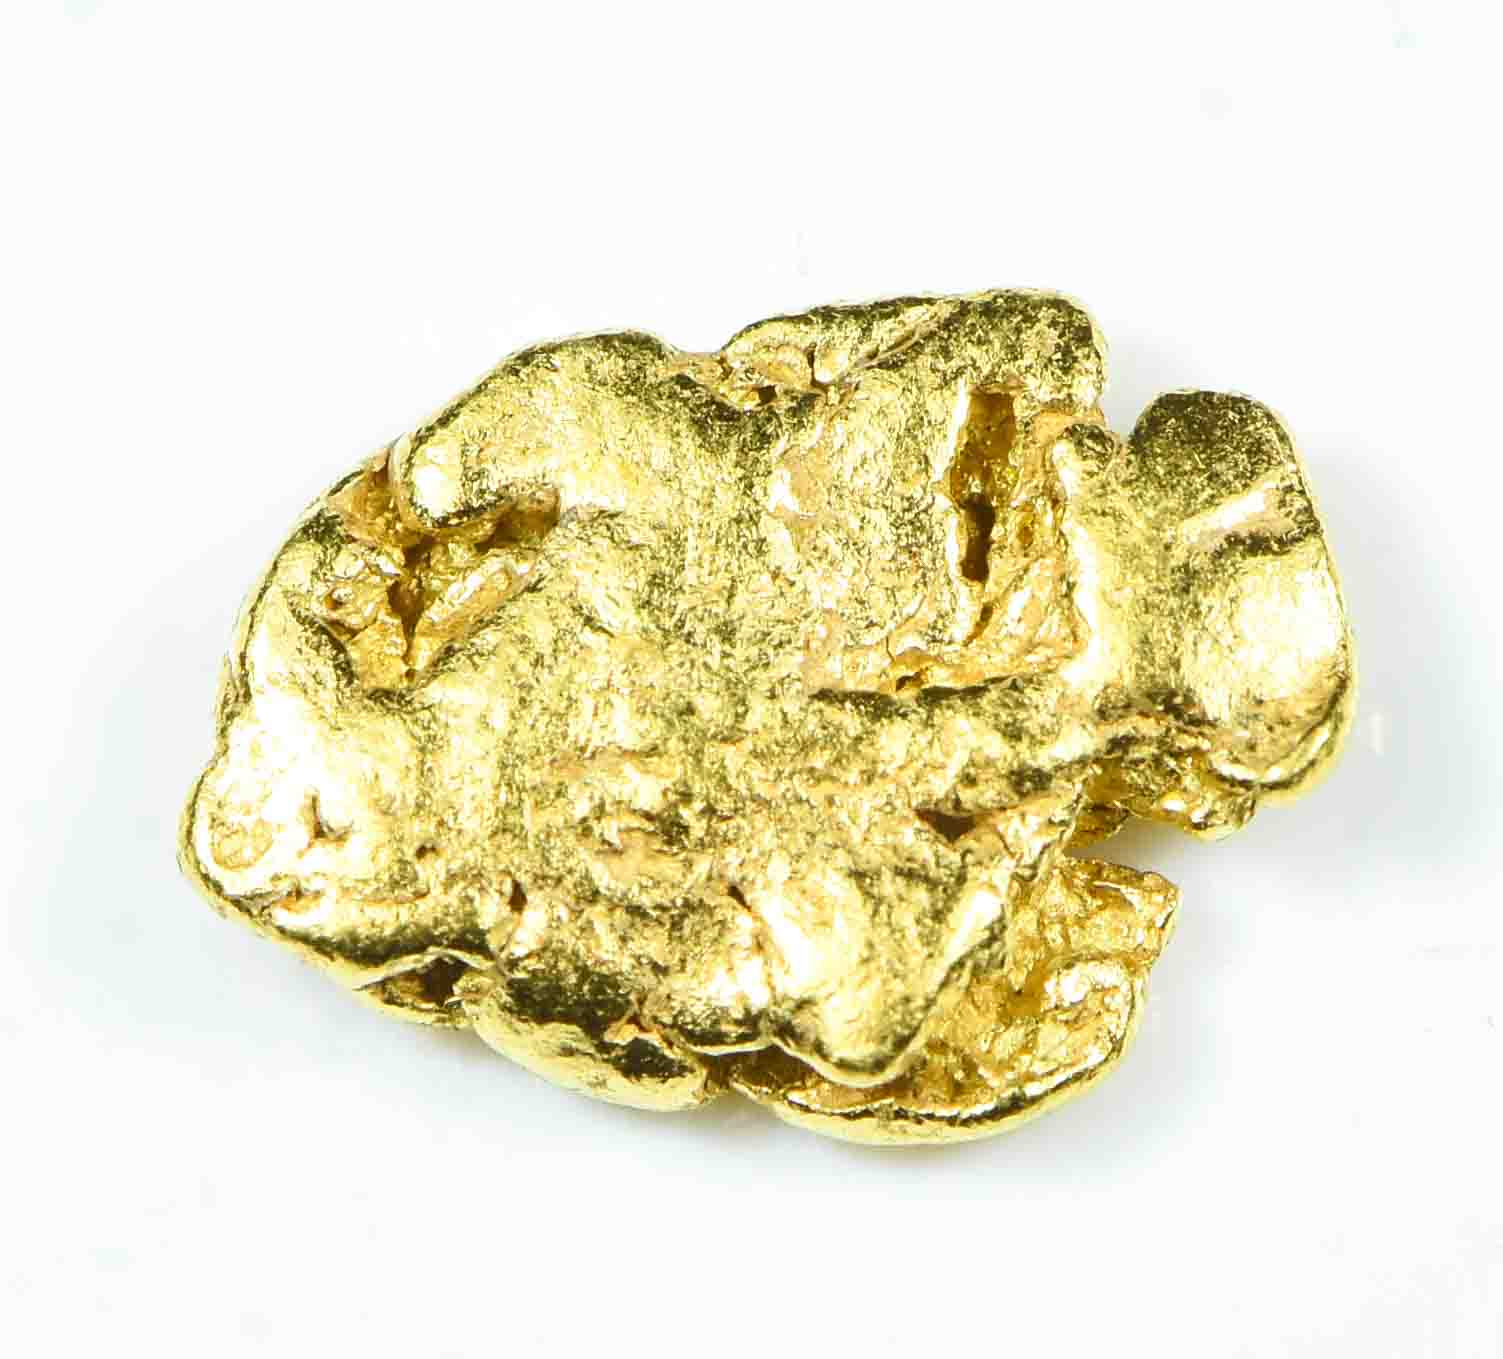 #12 California Gold Nugget 1.27 Grams Authentic Natural